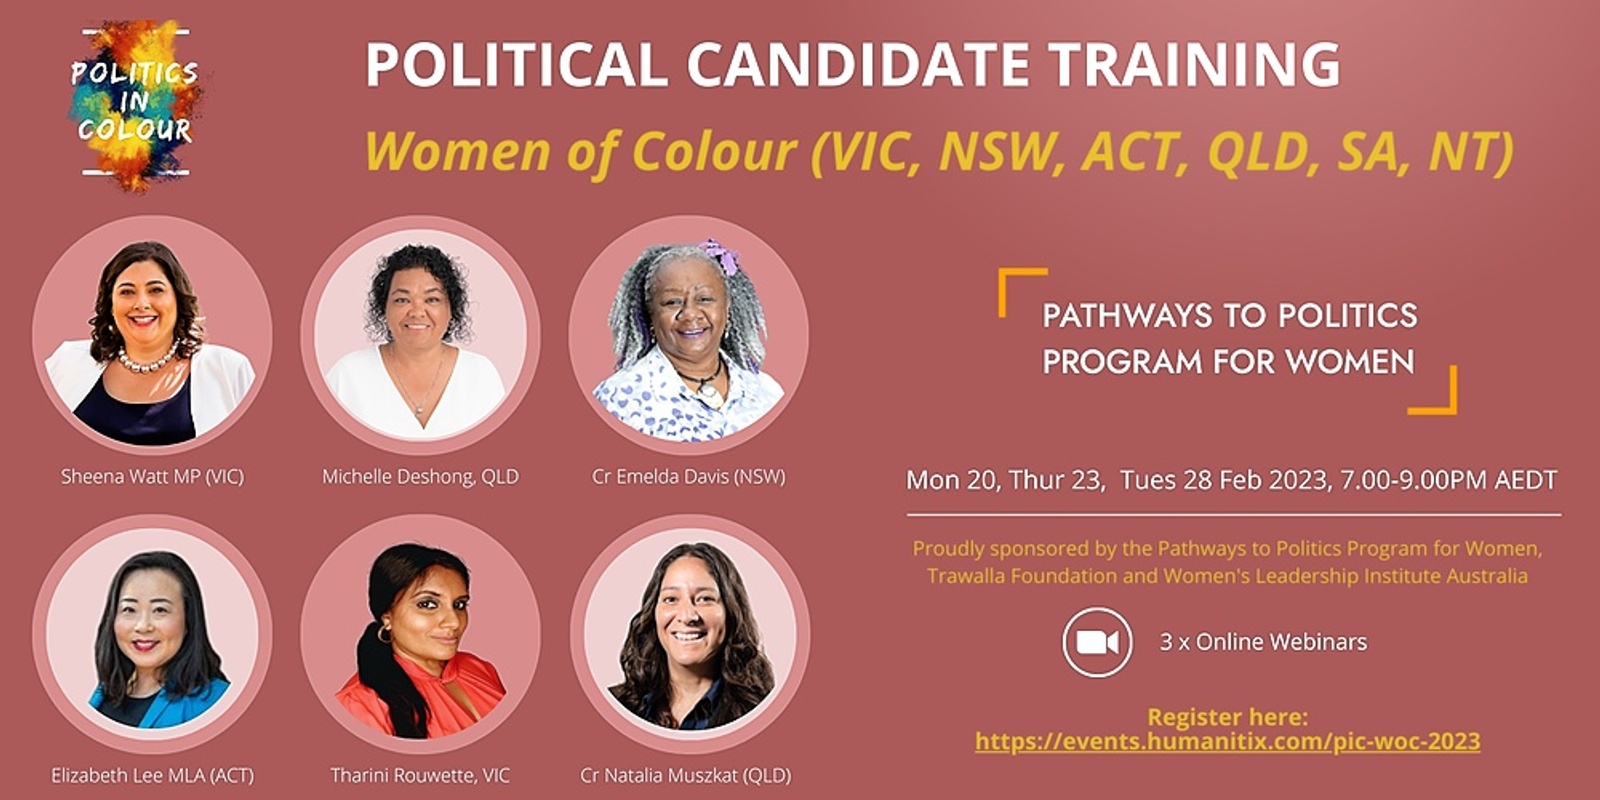 Political Candidate Training for Women of Colour - 20, 23 and 28 Feburary 2023